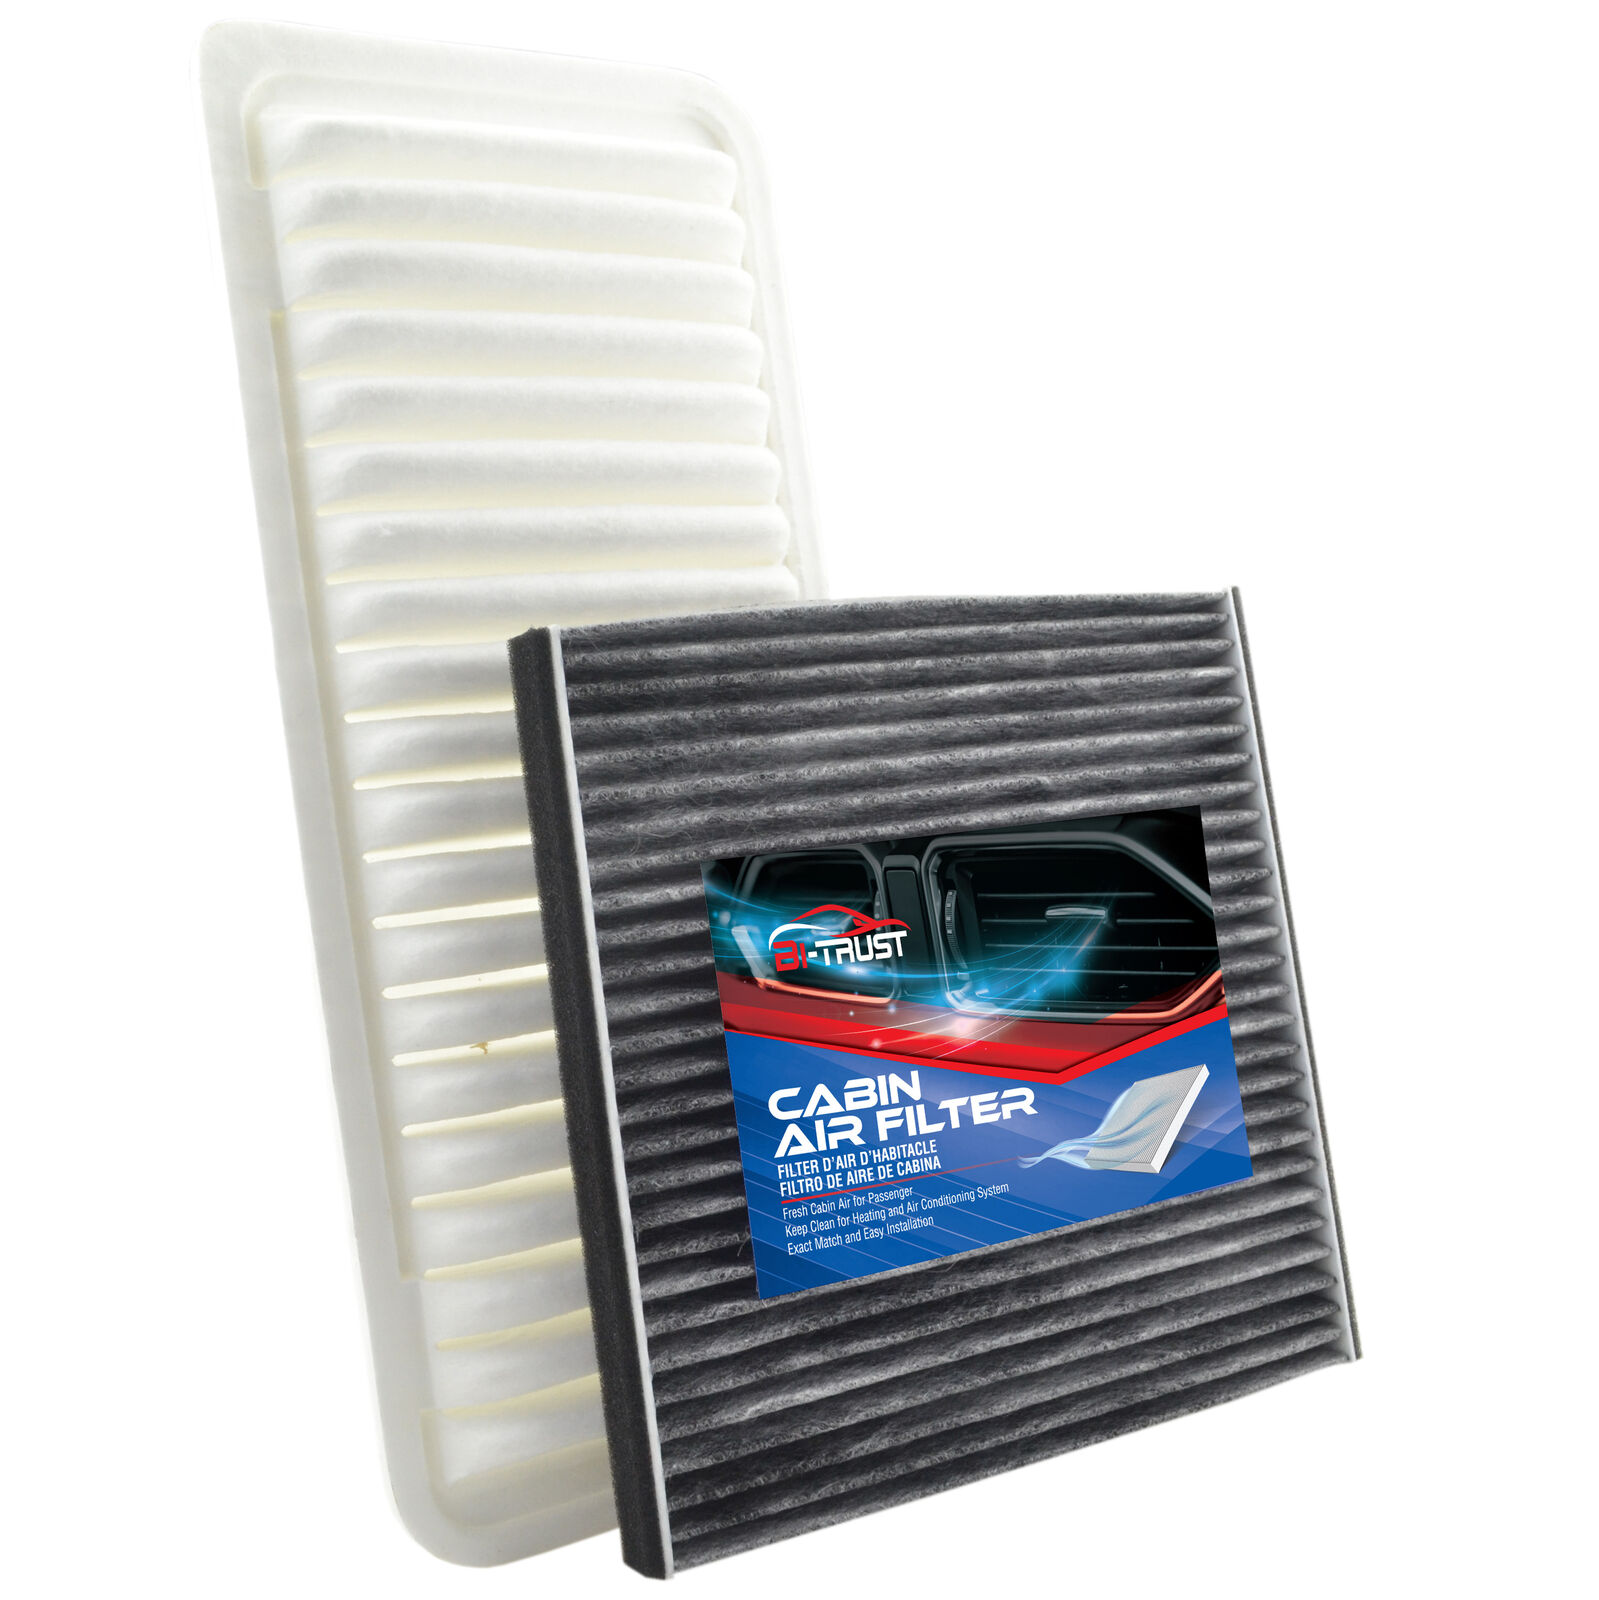 Cabin and Engine Air Filter Kit for Lexus RX400H 2006-2008 V6 3.3L 17801-20050